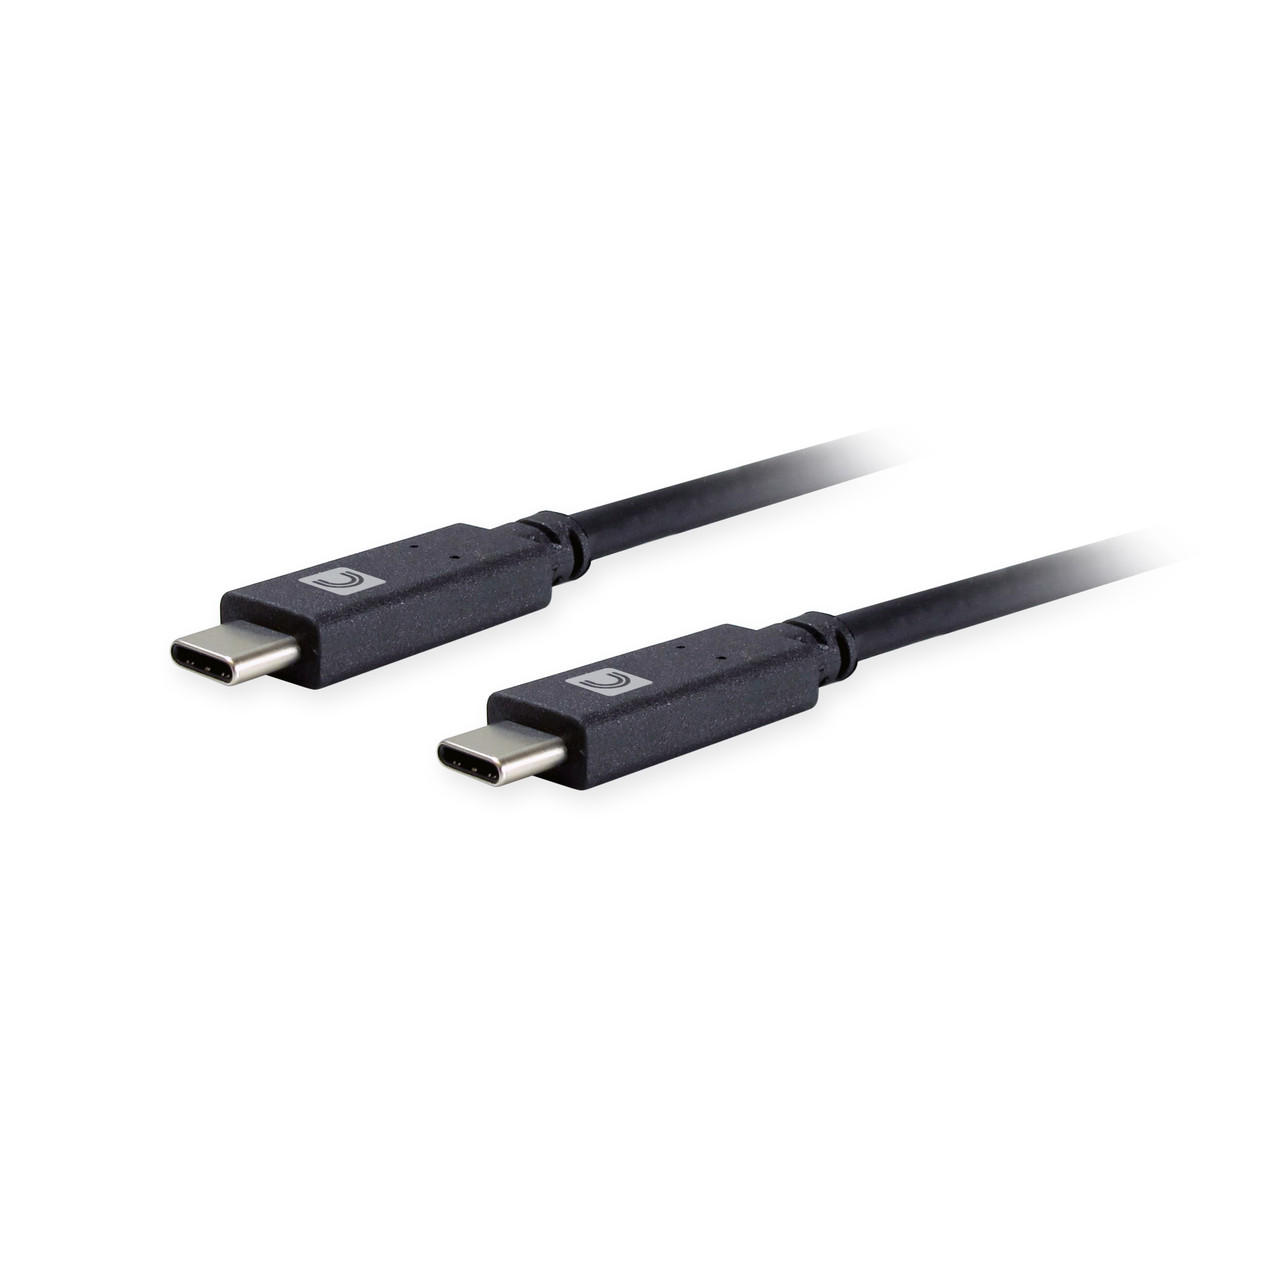 SuperSpeed USB 3.1 (Gen2) Cable